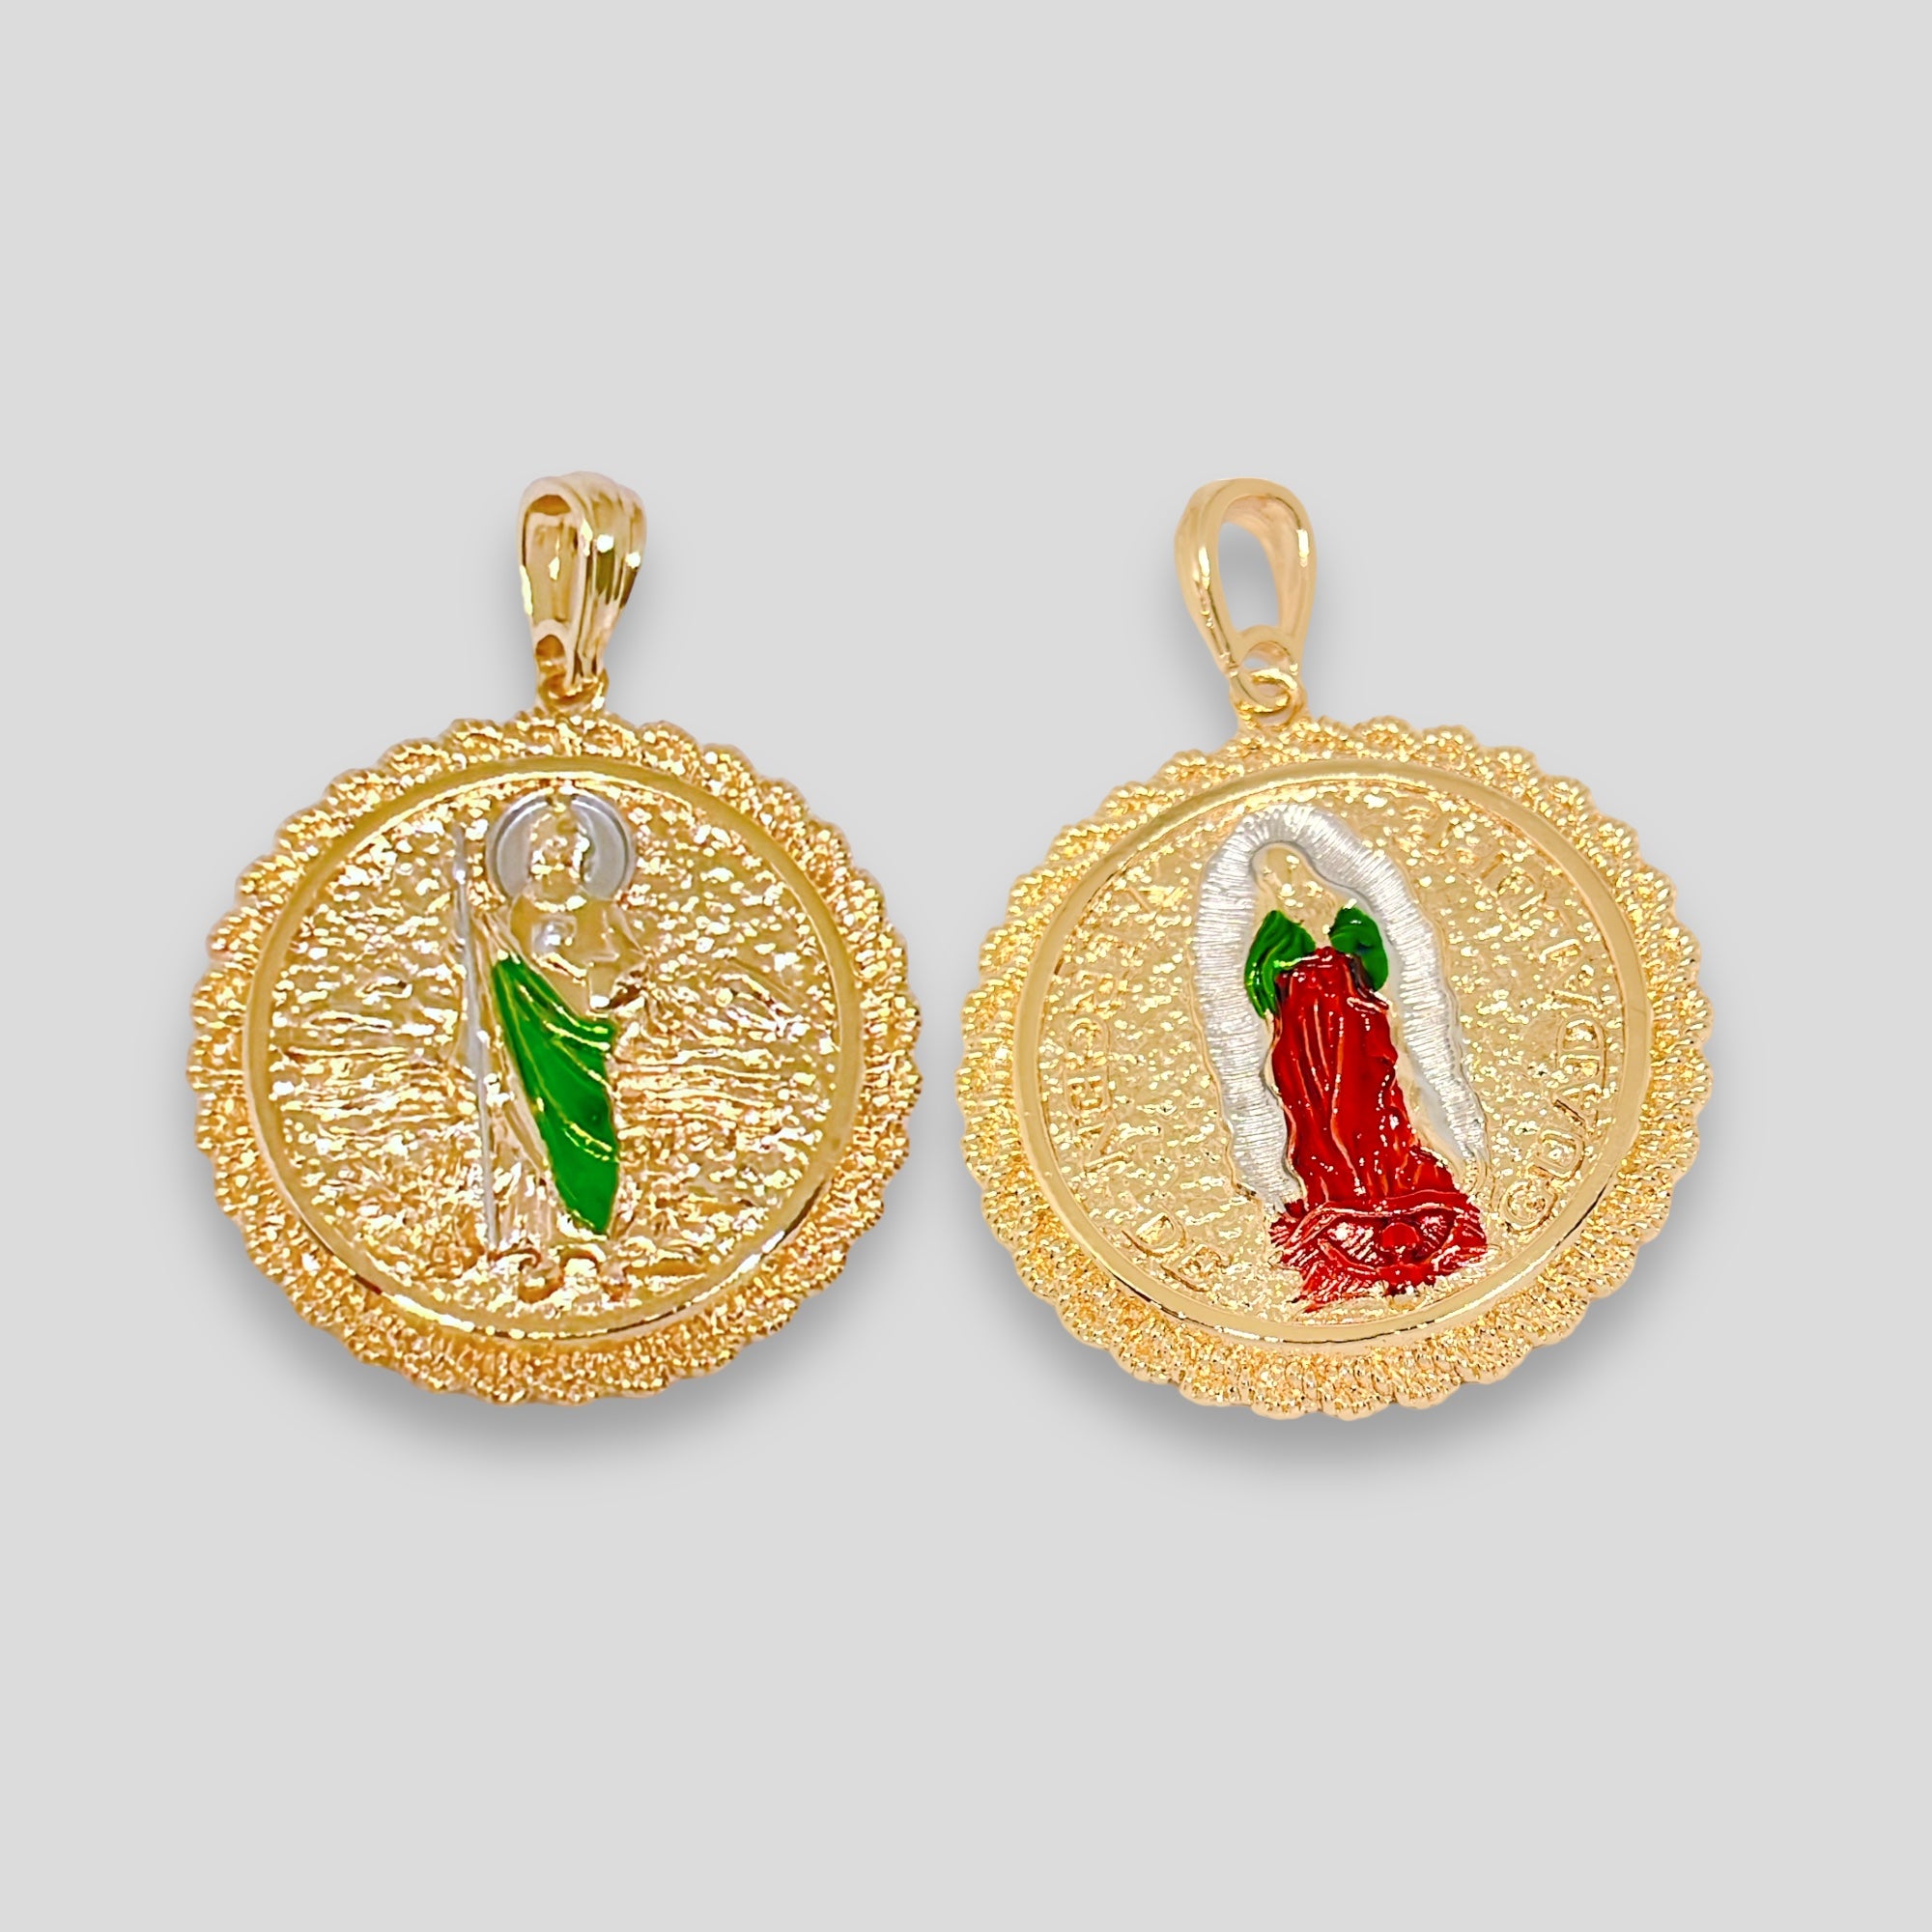 Double sided san judas guadalupe medallion pendant in 18k of gold layering